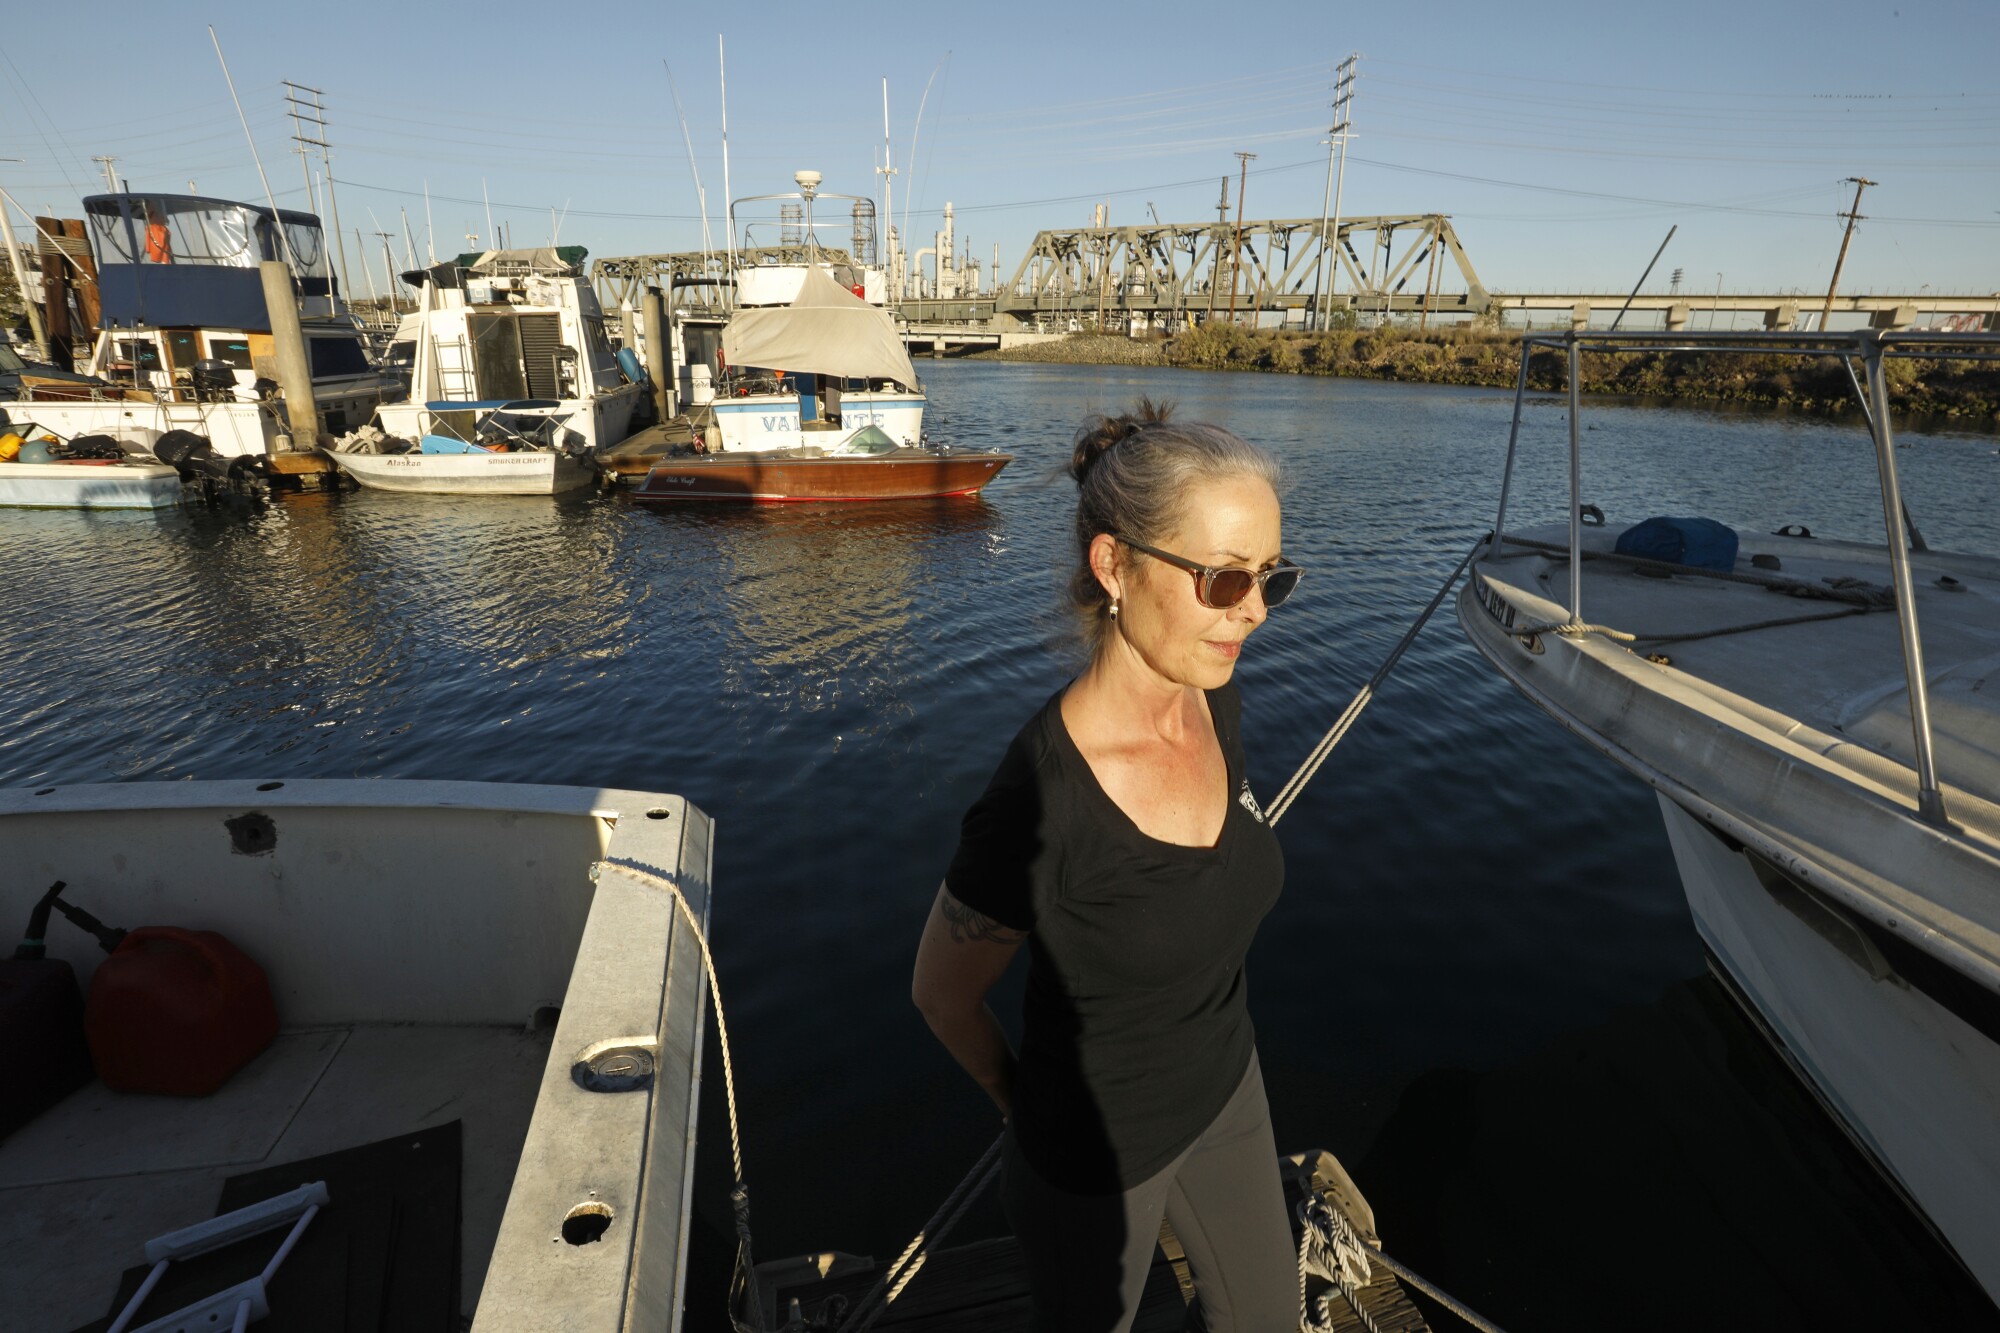 Nyla Olsen recalls the day in early October when a surge of putrid water rolled out of the Dominguez Channel.